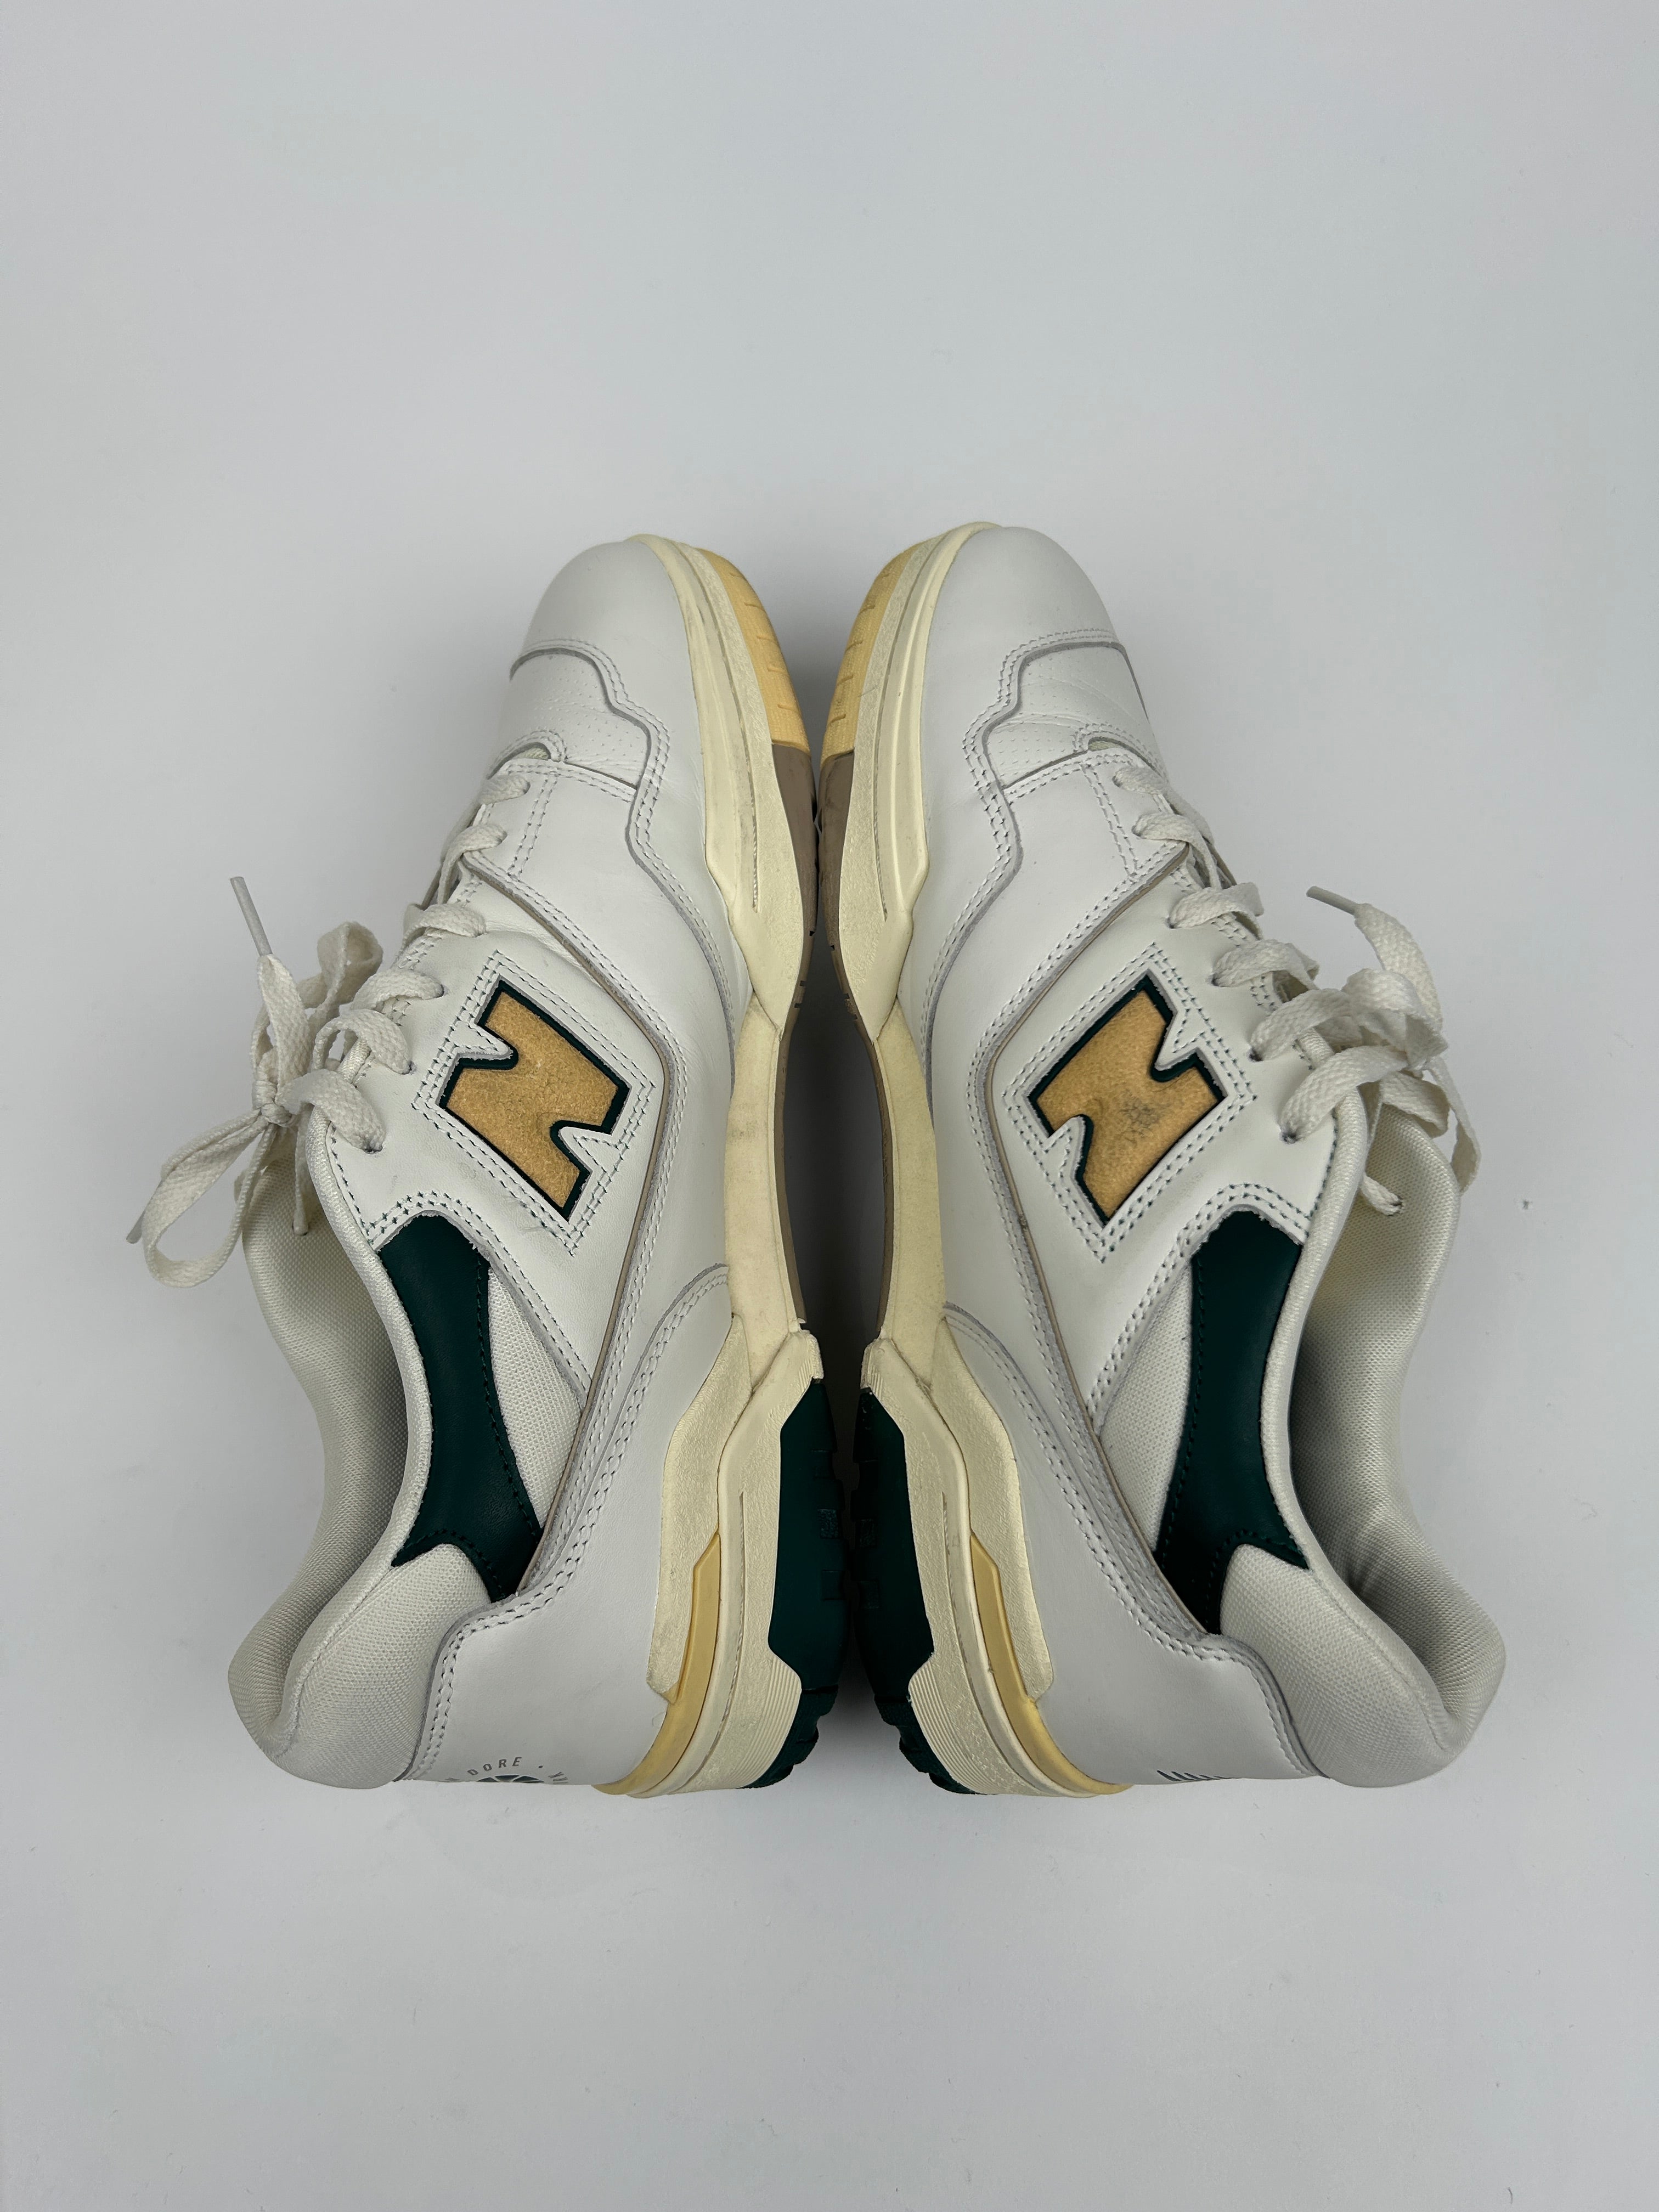 New Balance 550 Aime Leon Dore Natural Green (Pre-Owned)